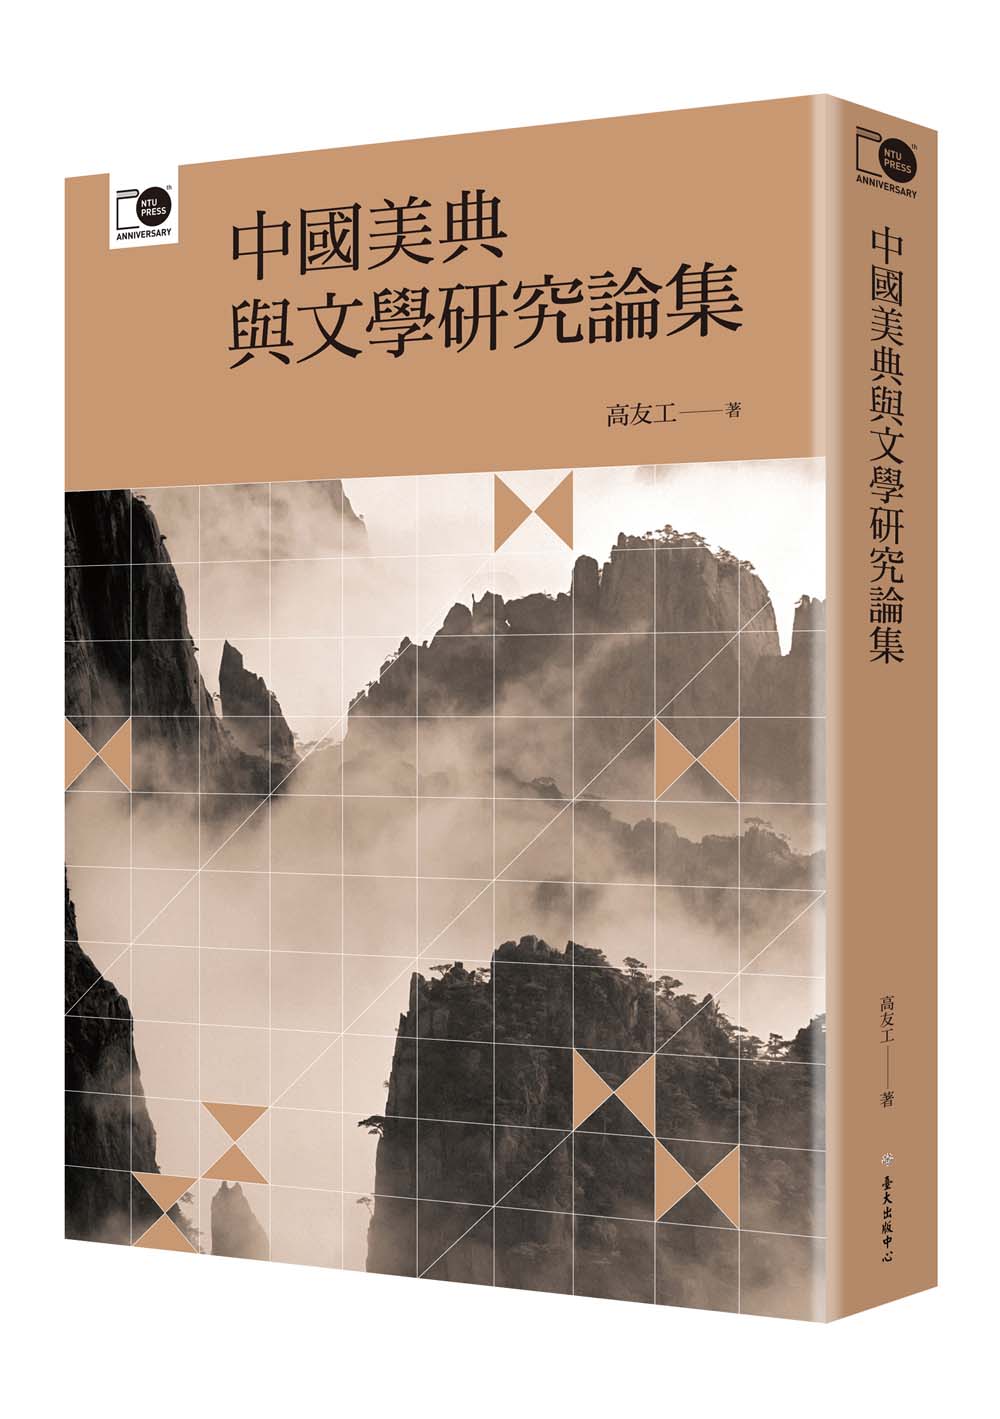 Analects of Chinese Aesthetic Classic and Literature